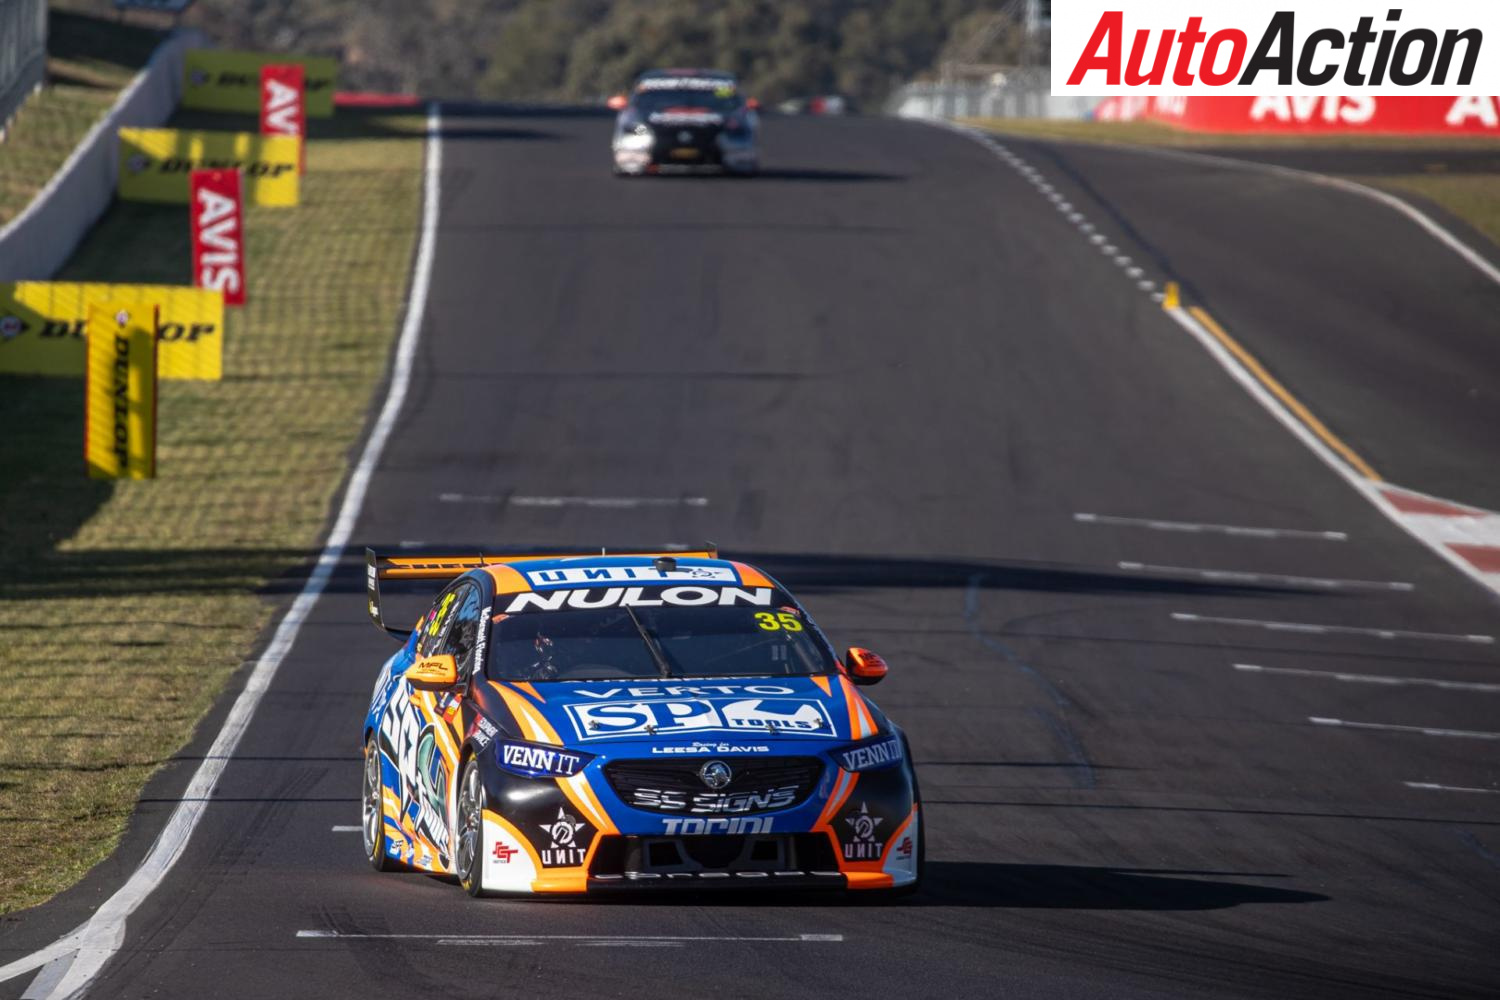 Matt Stone Racing secures second entry - Photo: InSyde Media